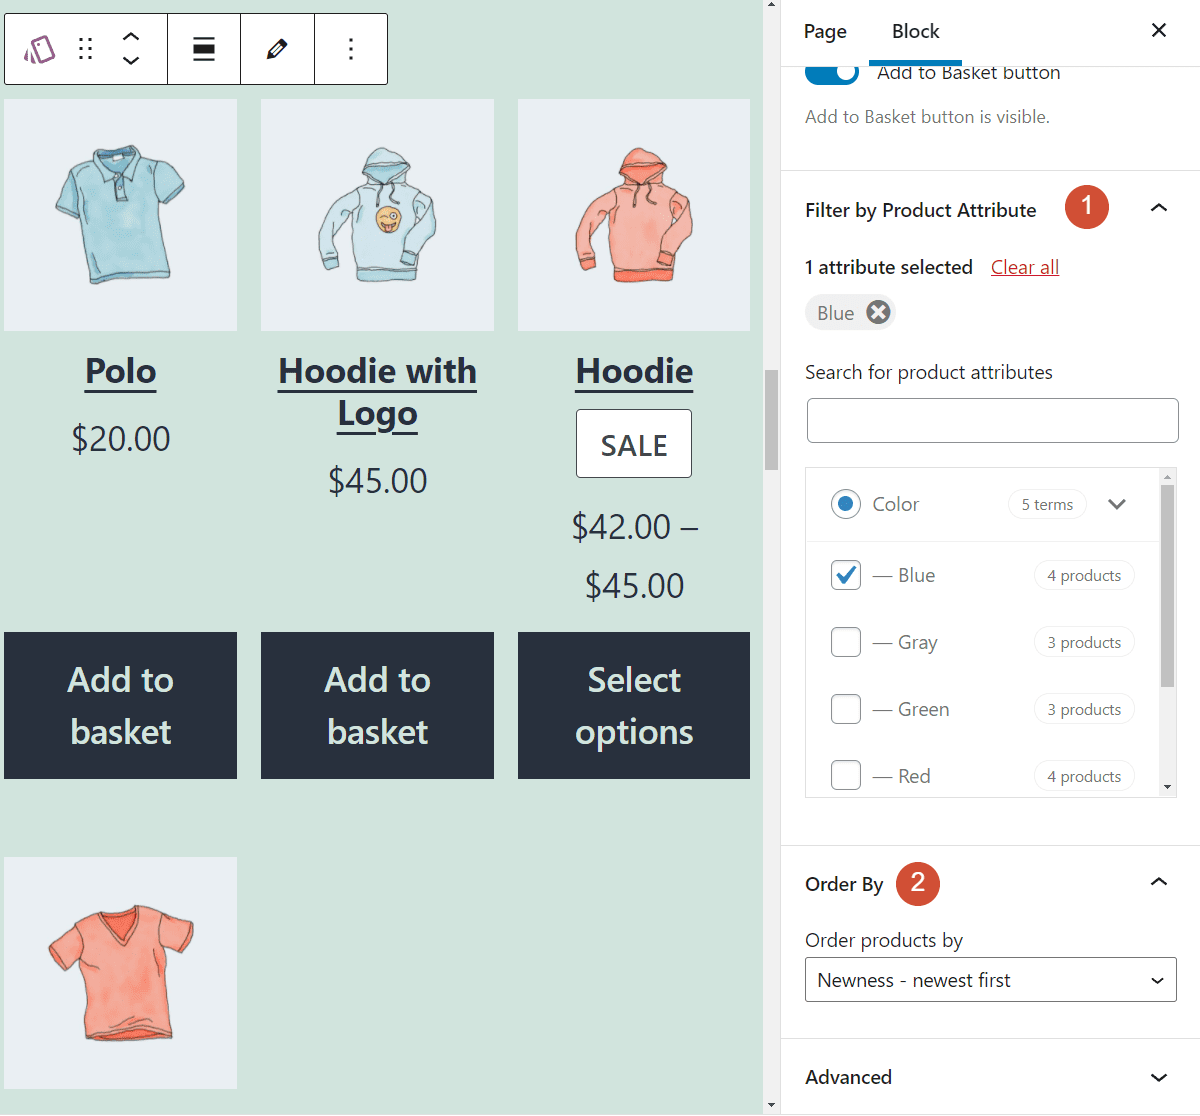 Changing the order in which products appear within your block